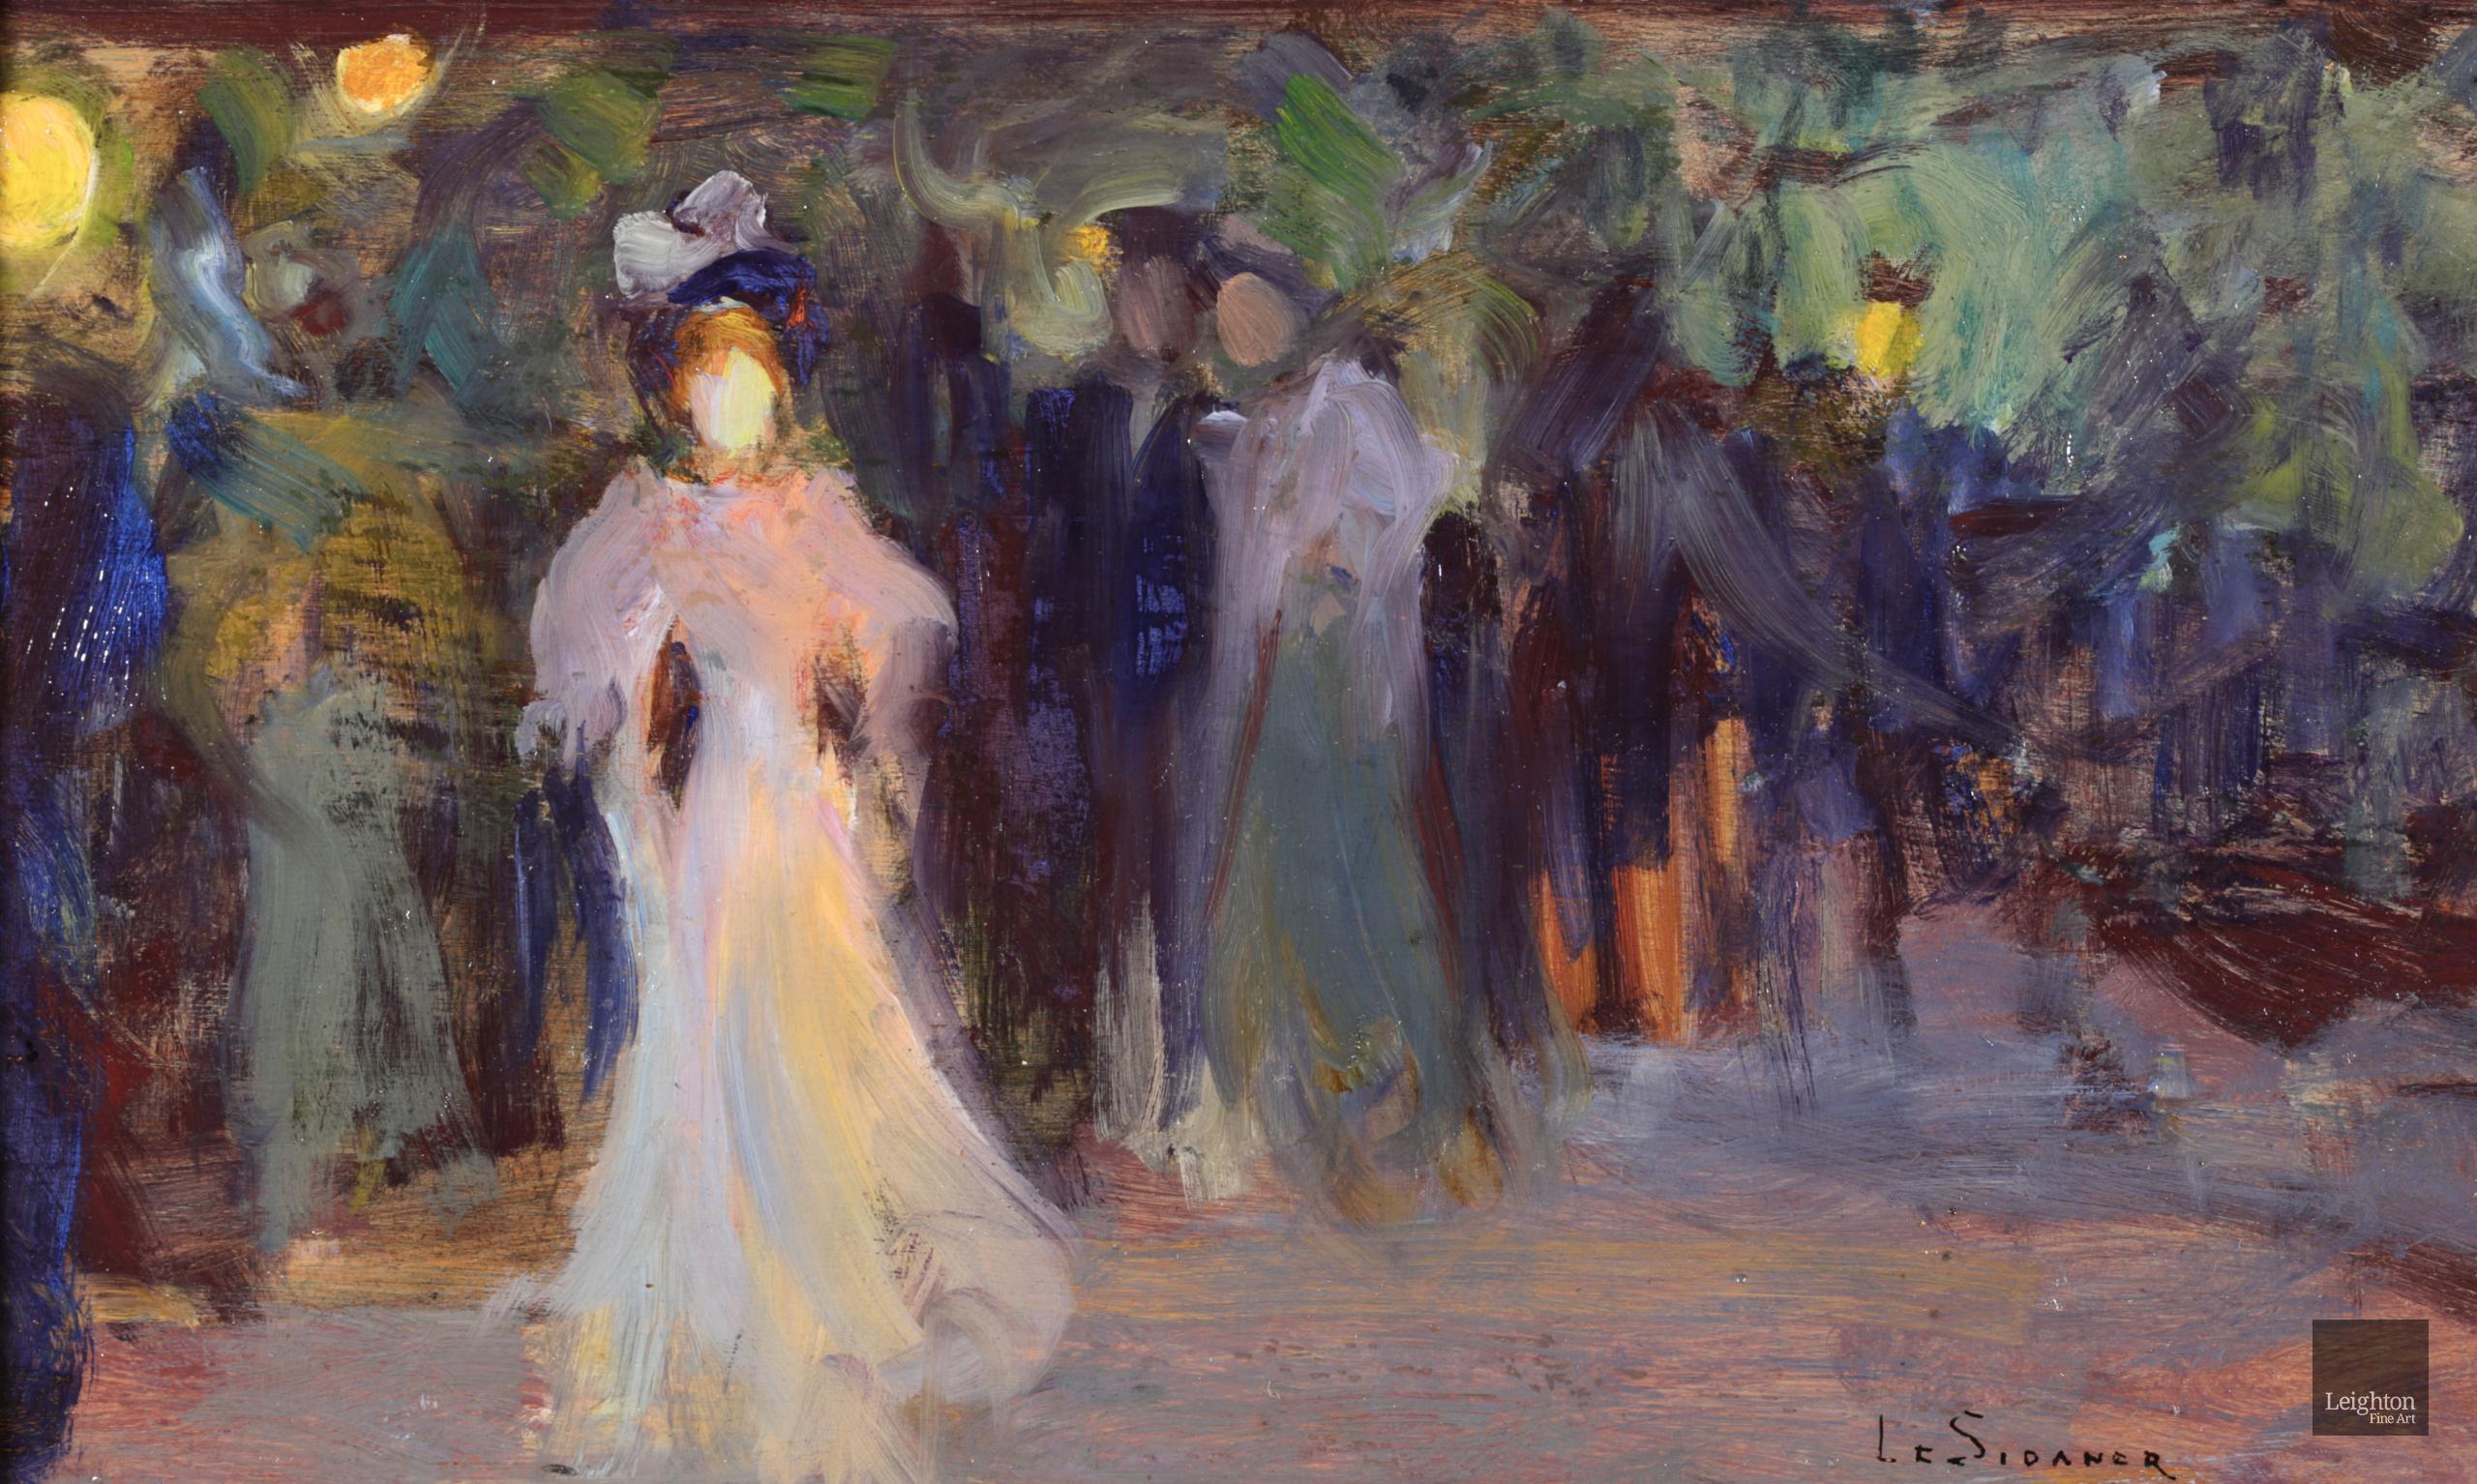 An Evening Walk - Post Impressionist Oil, Figures at Night by Henri Le Sidaner